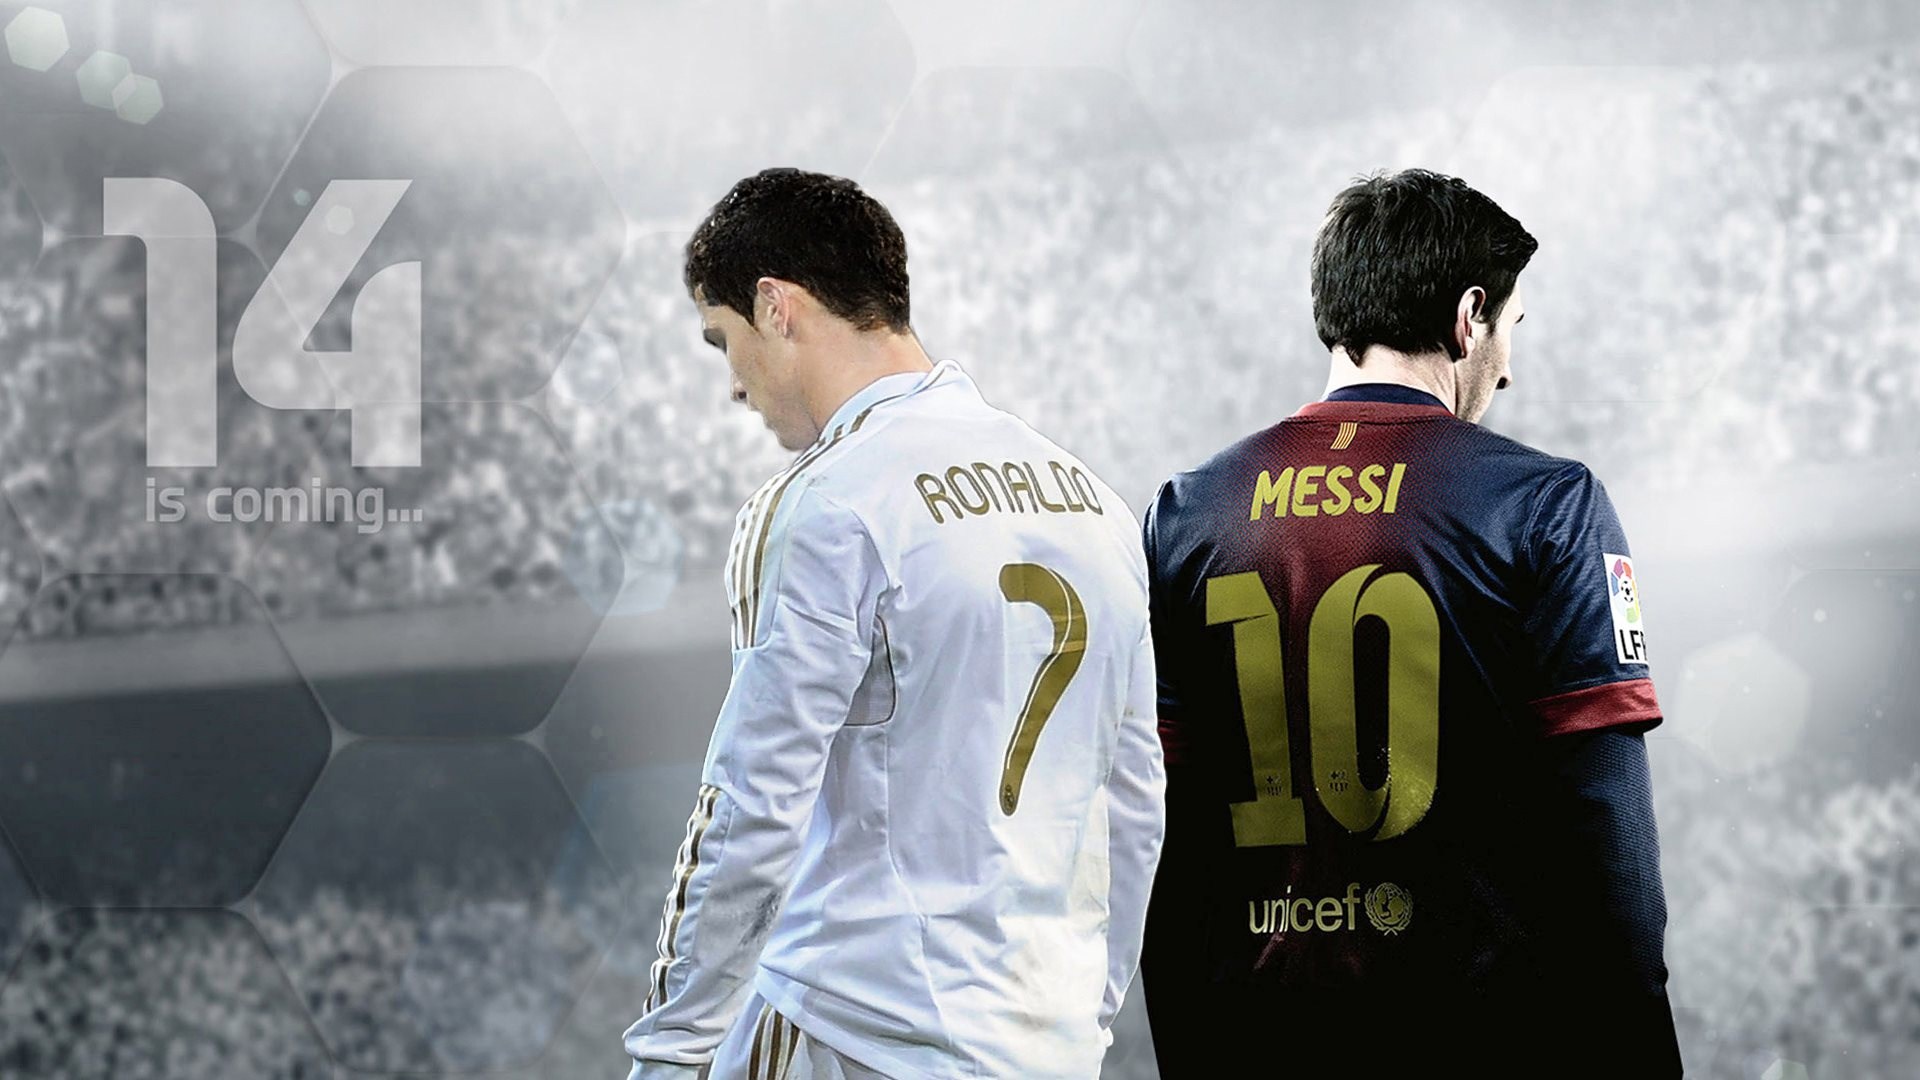 Fifa Pictures High Resolution - Messi And Ronaldo Wallpaper Hd - HD Wallpaper 